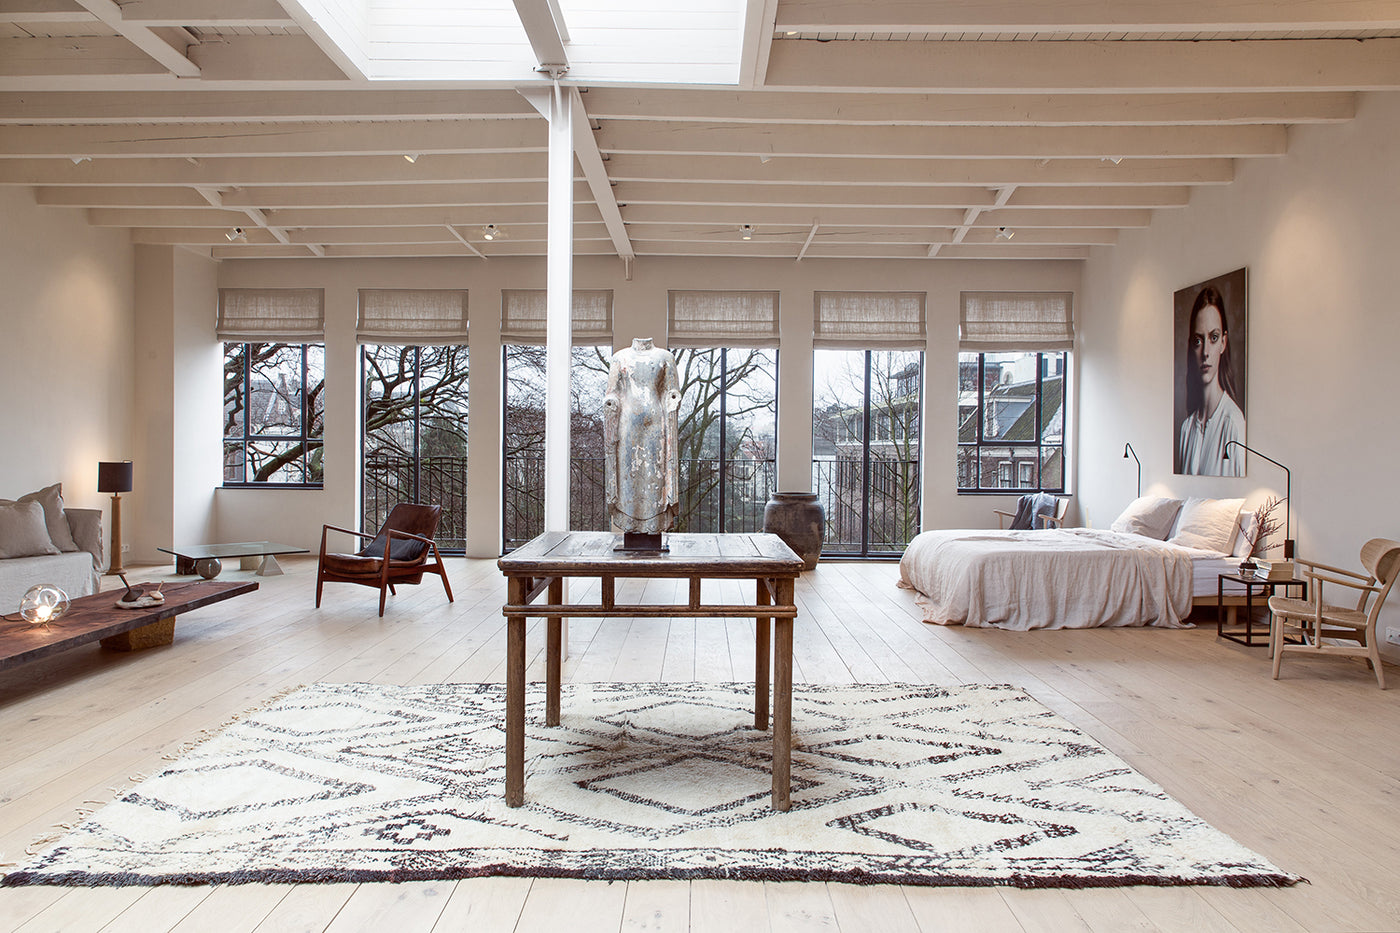 a light and lofty open living and bedroom interior - The Loft IV - MISS BARE - Enter The Loft